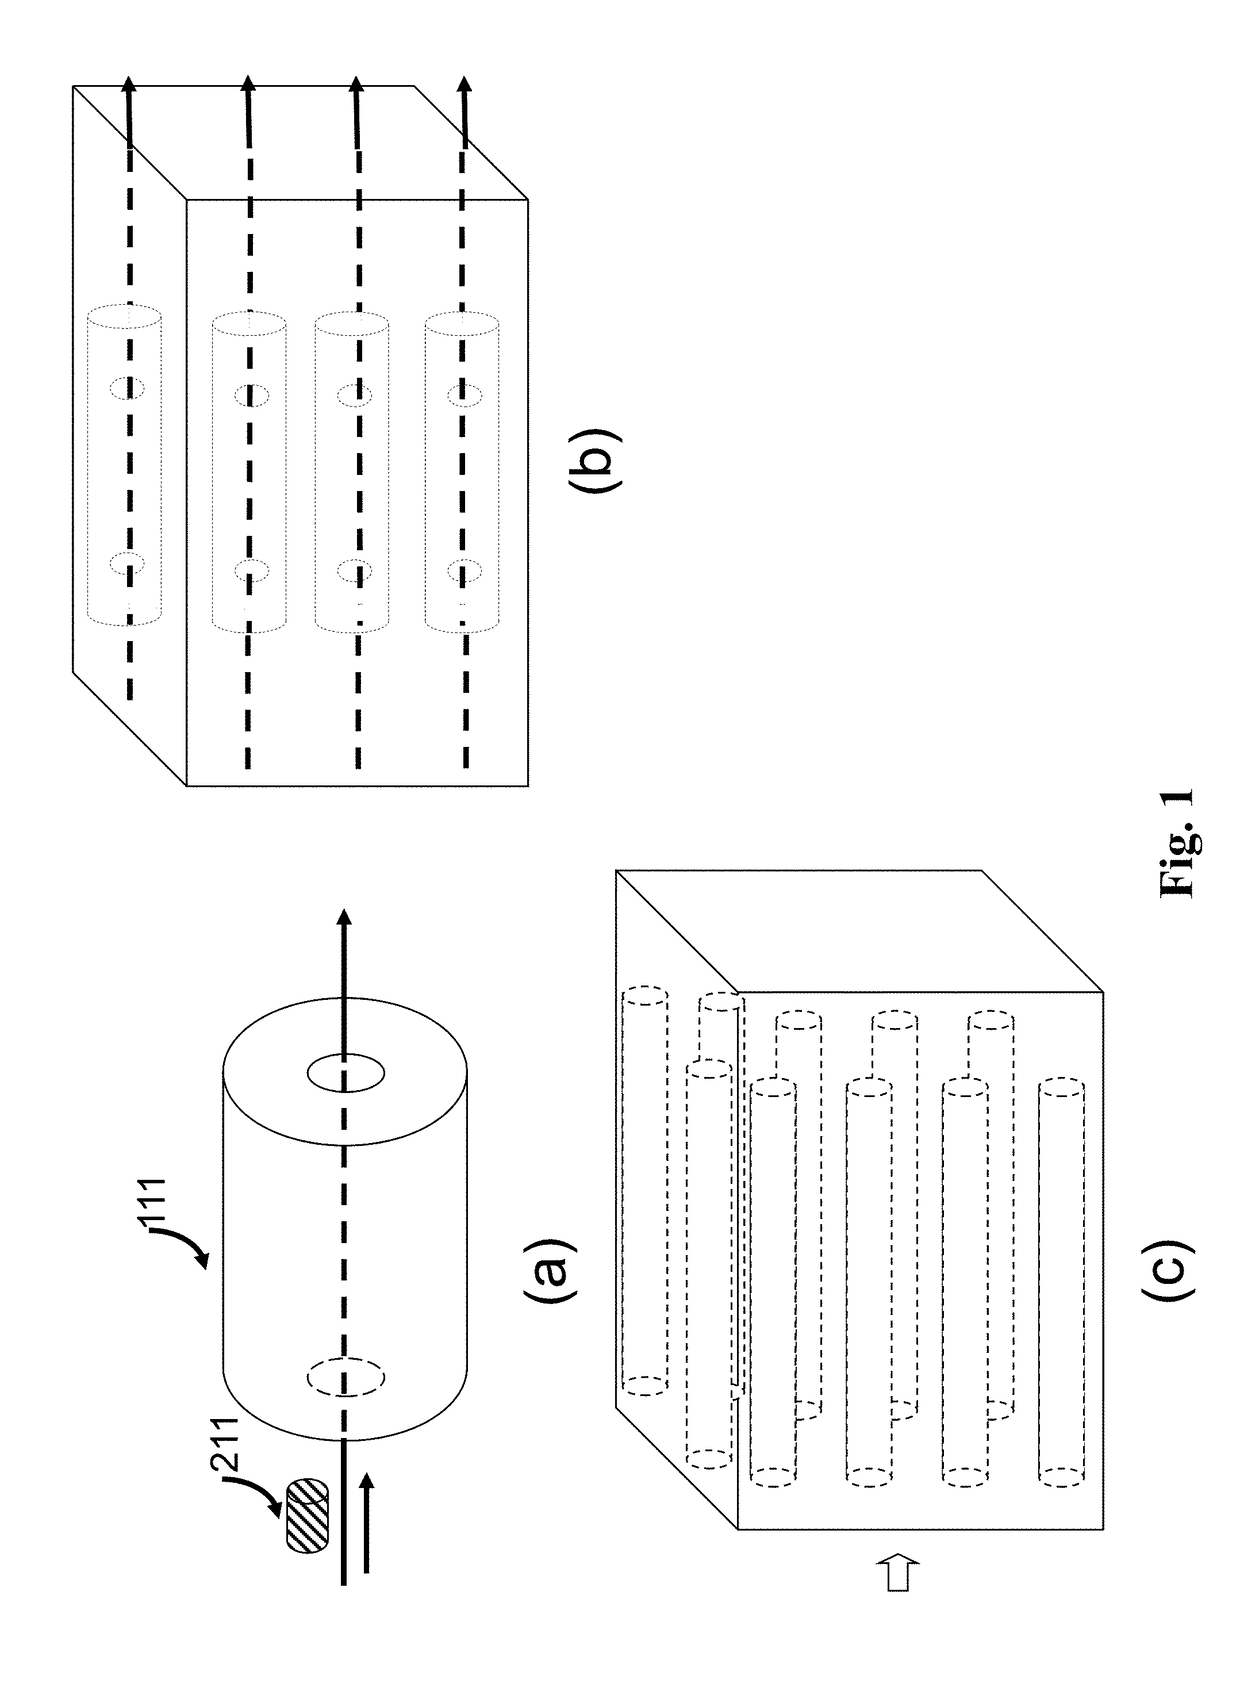 Apparatus and methods for disease detection